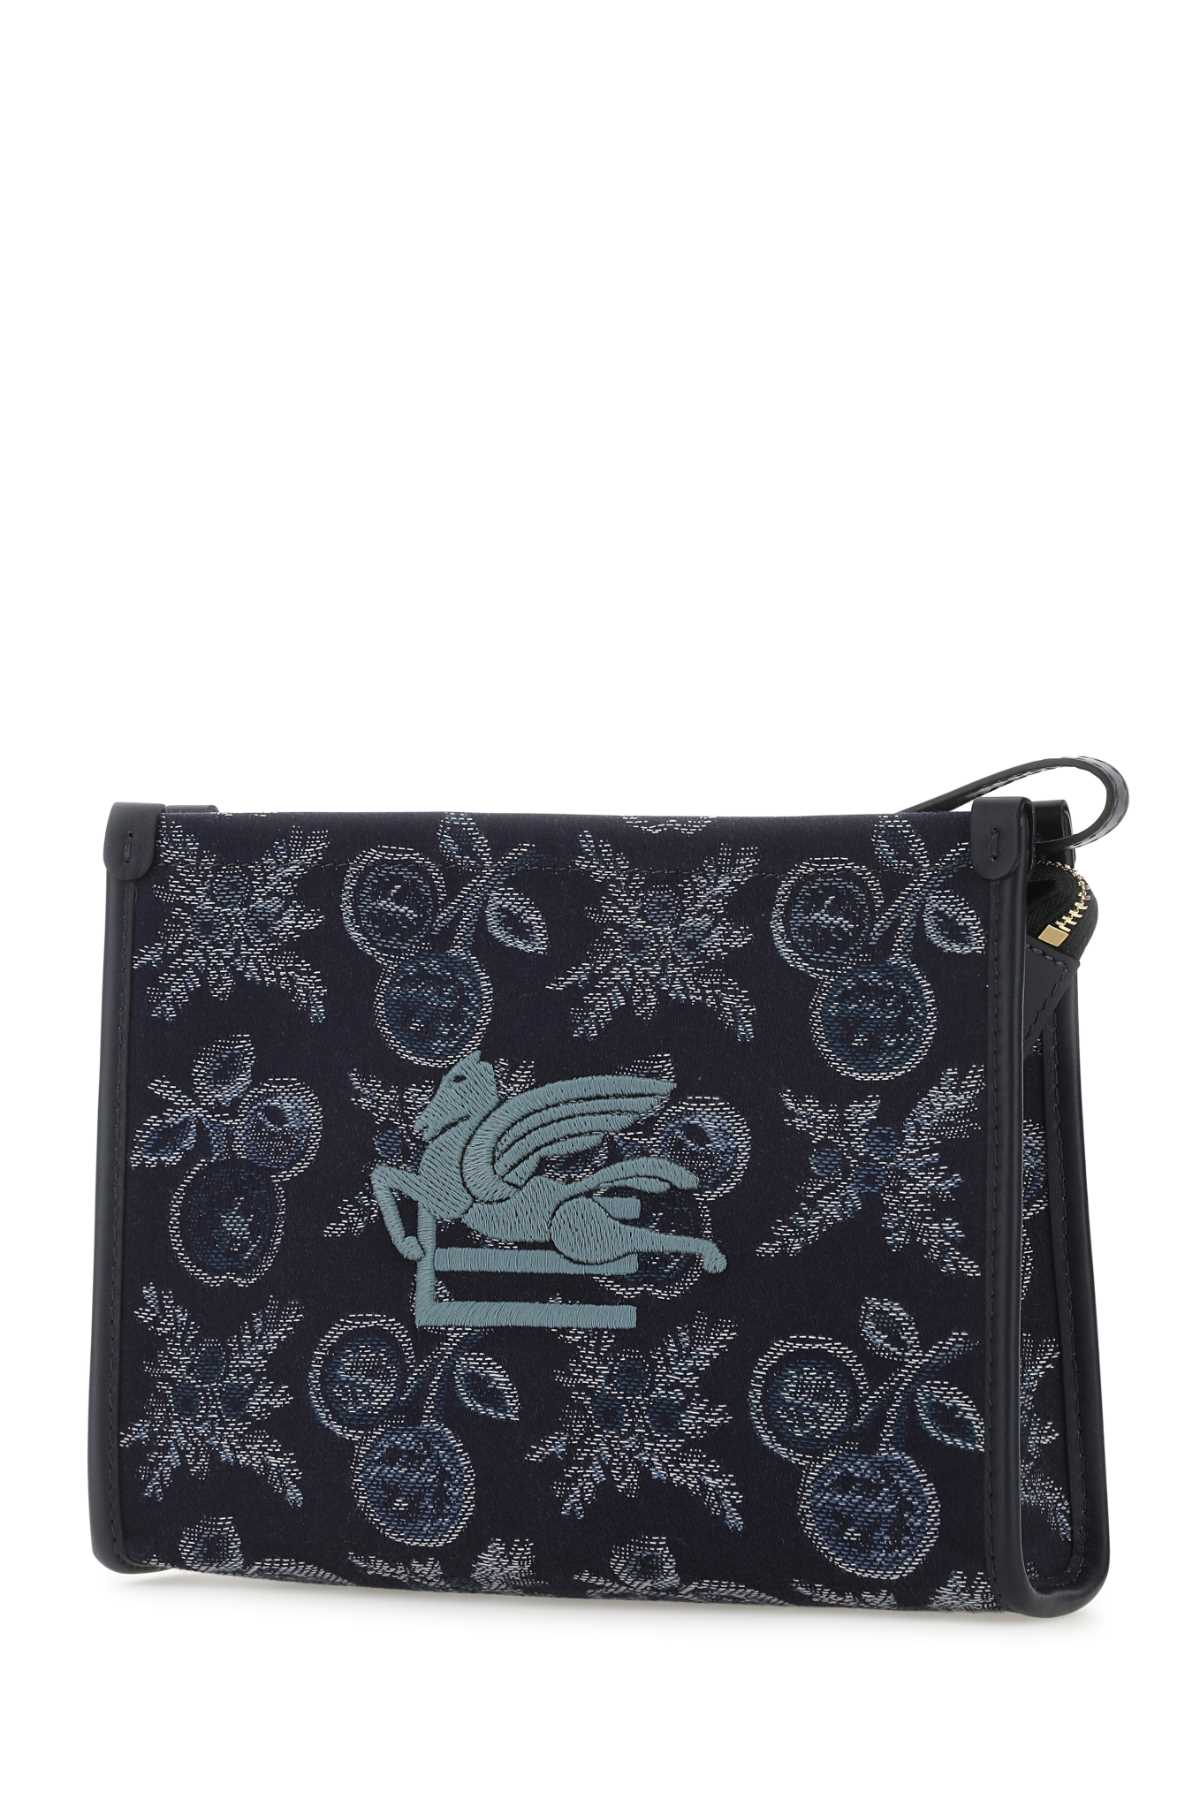 Etro Embroidered Canvas Beauty Case In Blue